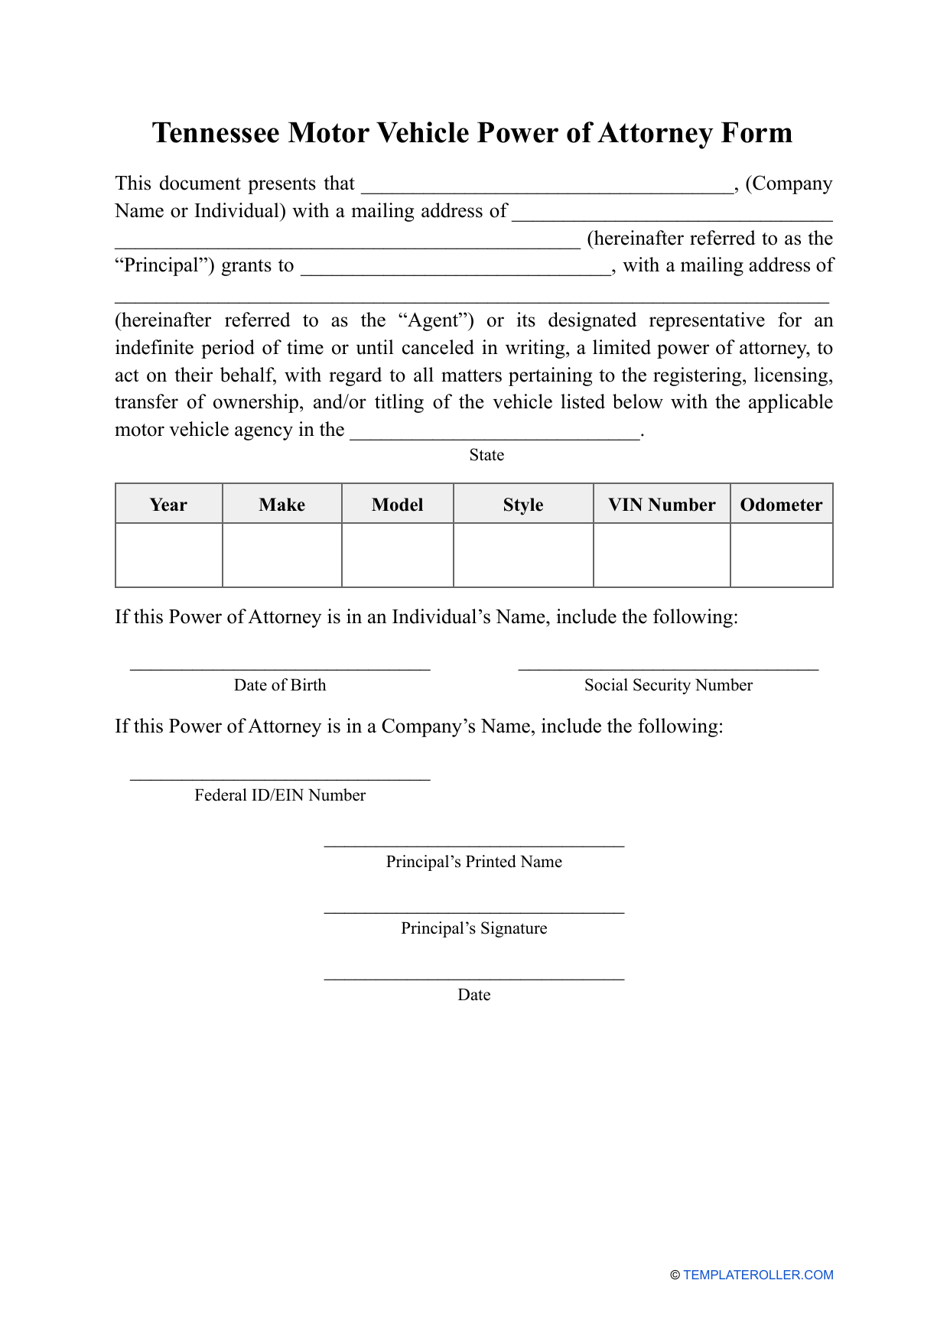 Motor Vehicle Power of Attorney Form - Tennessee, Page 1